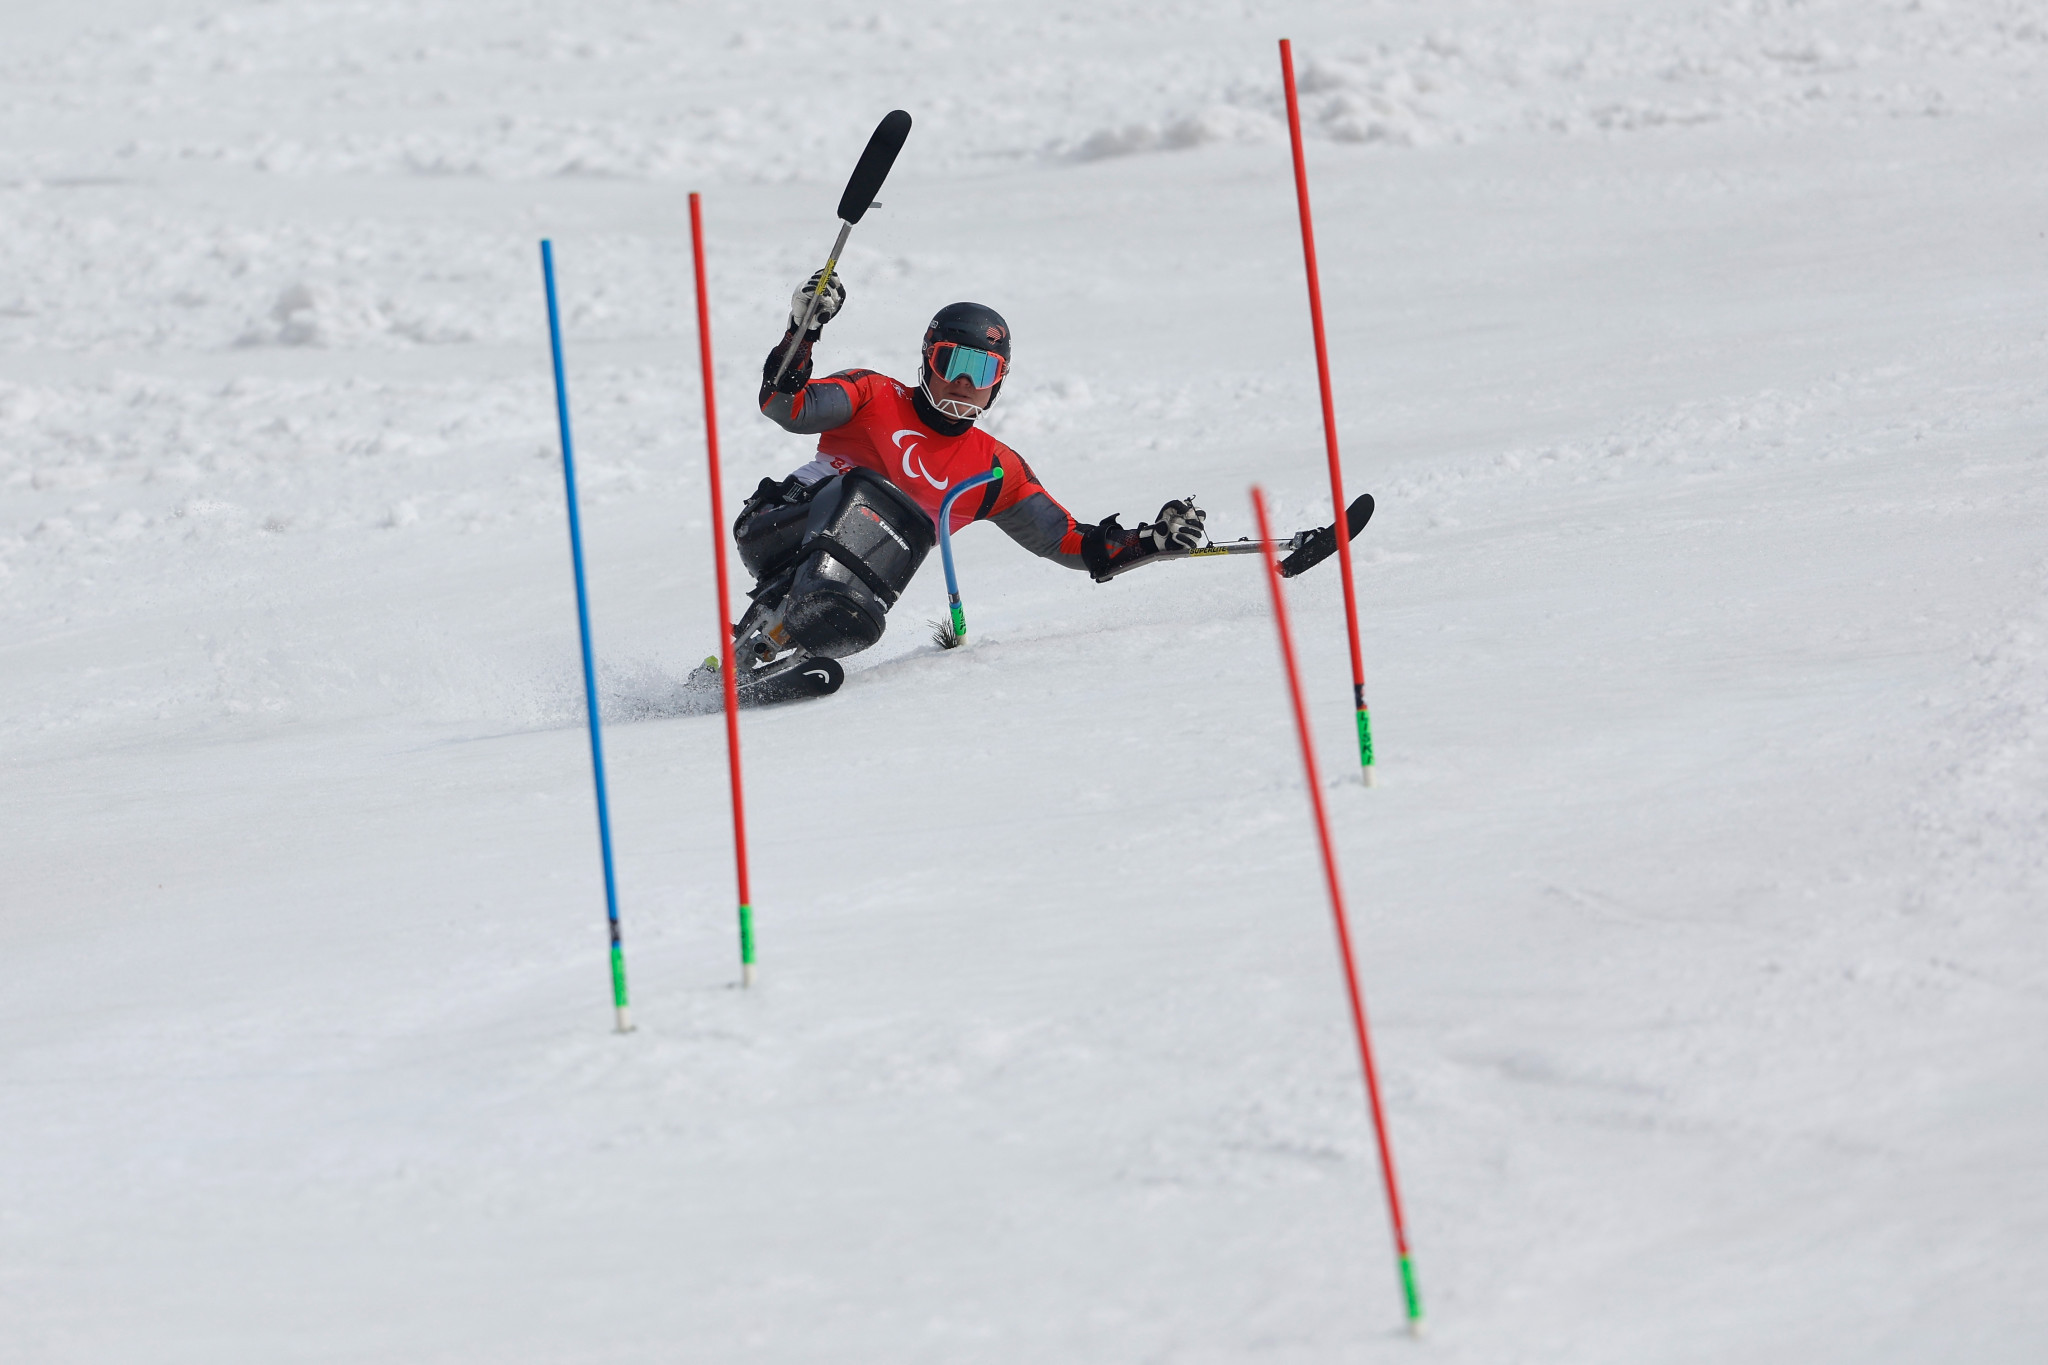 FIS a step closer to governing Para snow sports after Congress green light